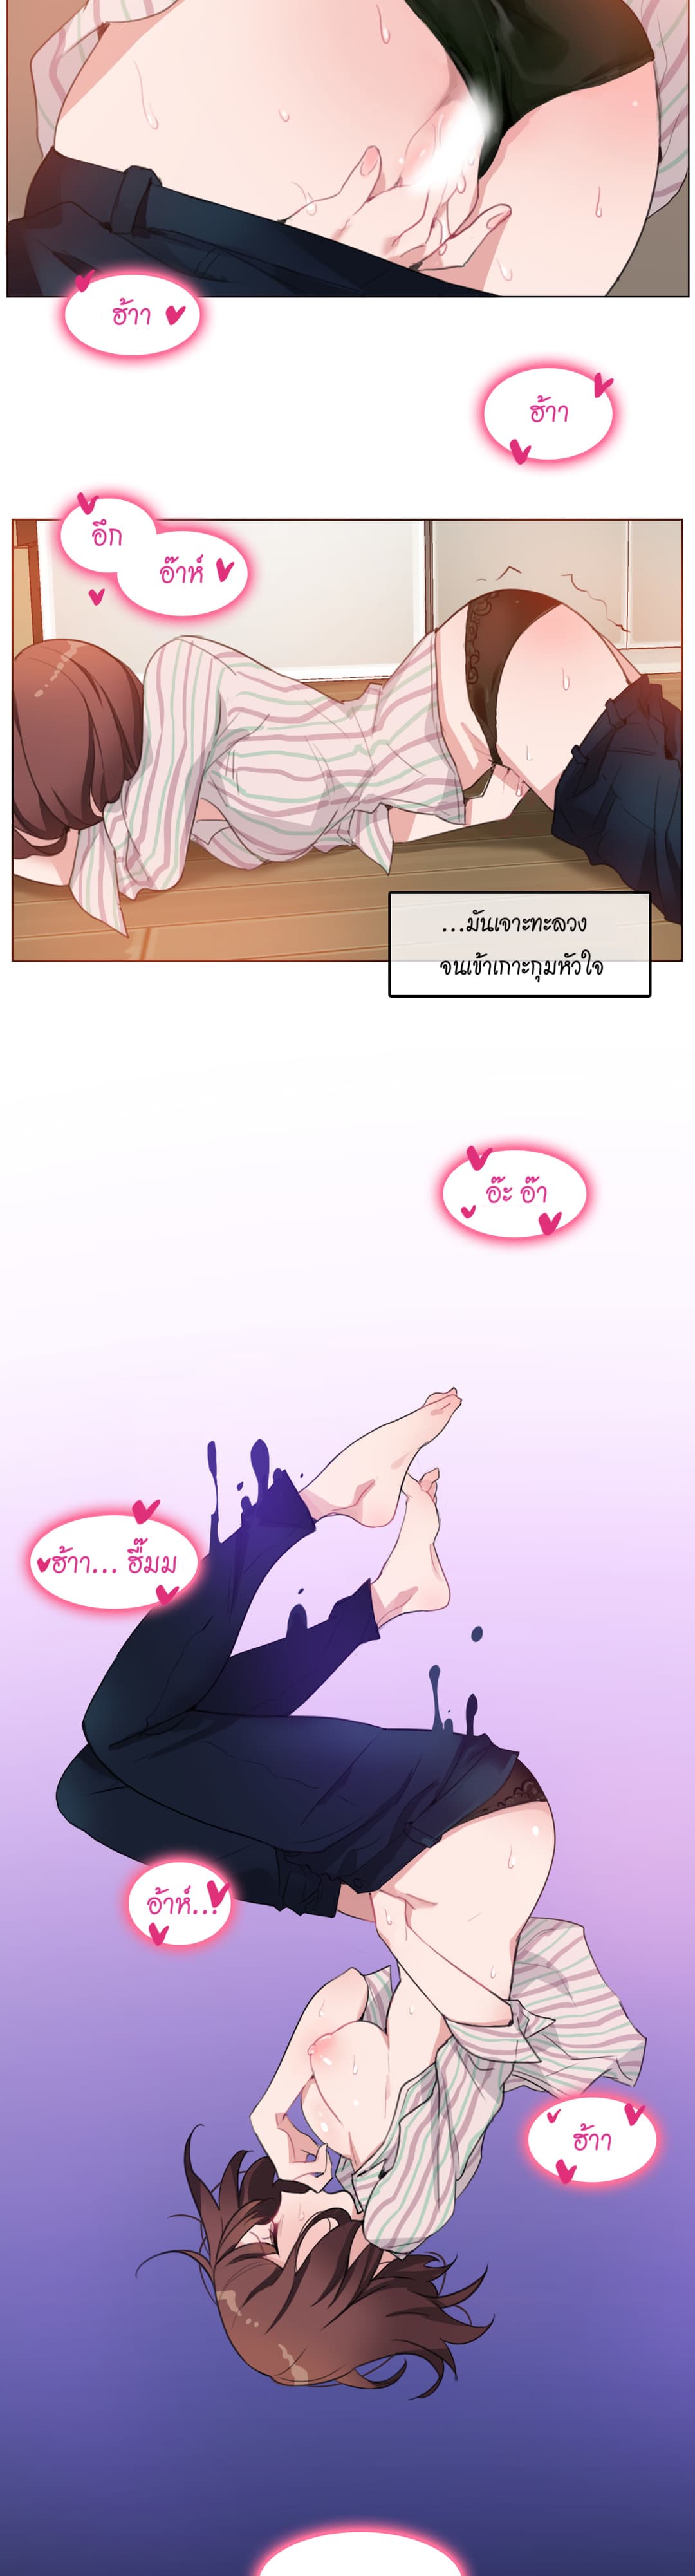 A Pervert’s Daily Life 10 (5)